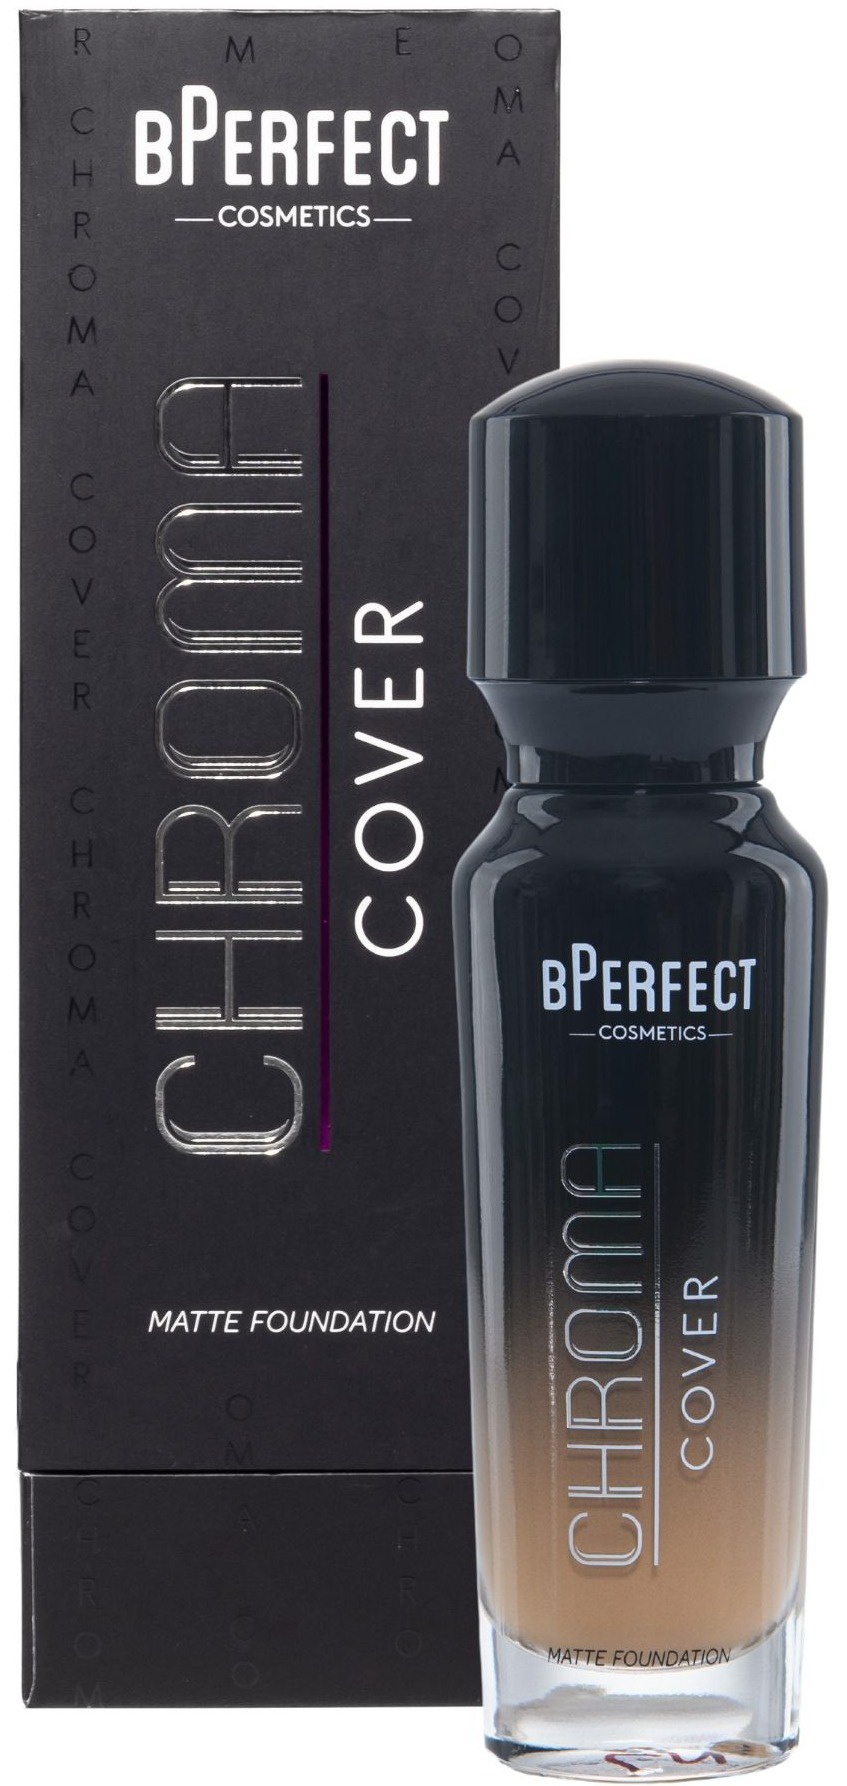 Bperfect cosmectics Chroma Cover Matte Foundation